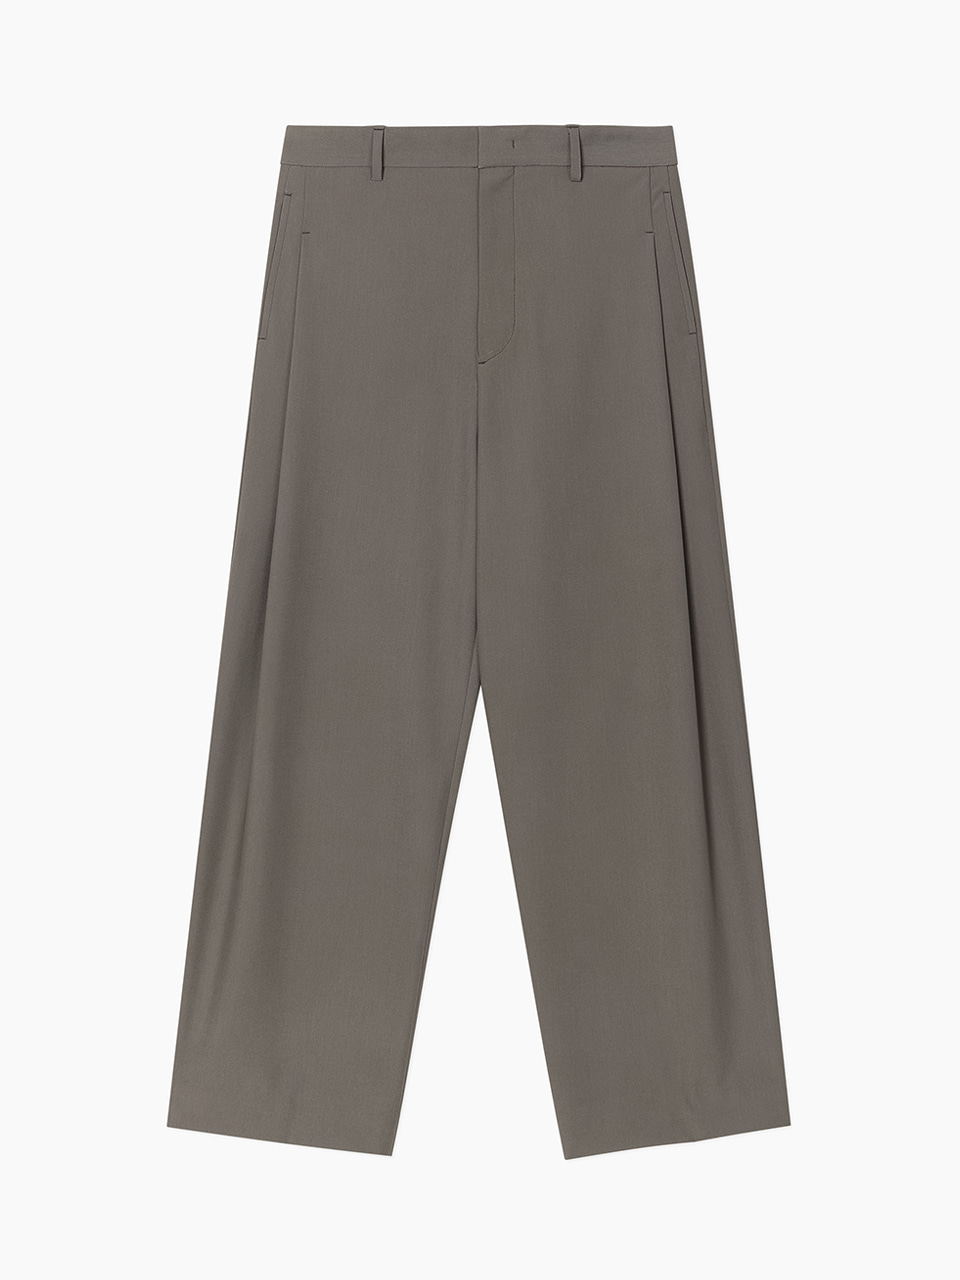 Twill Weave Side Tuck Pants (Charcoal Brown)